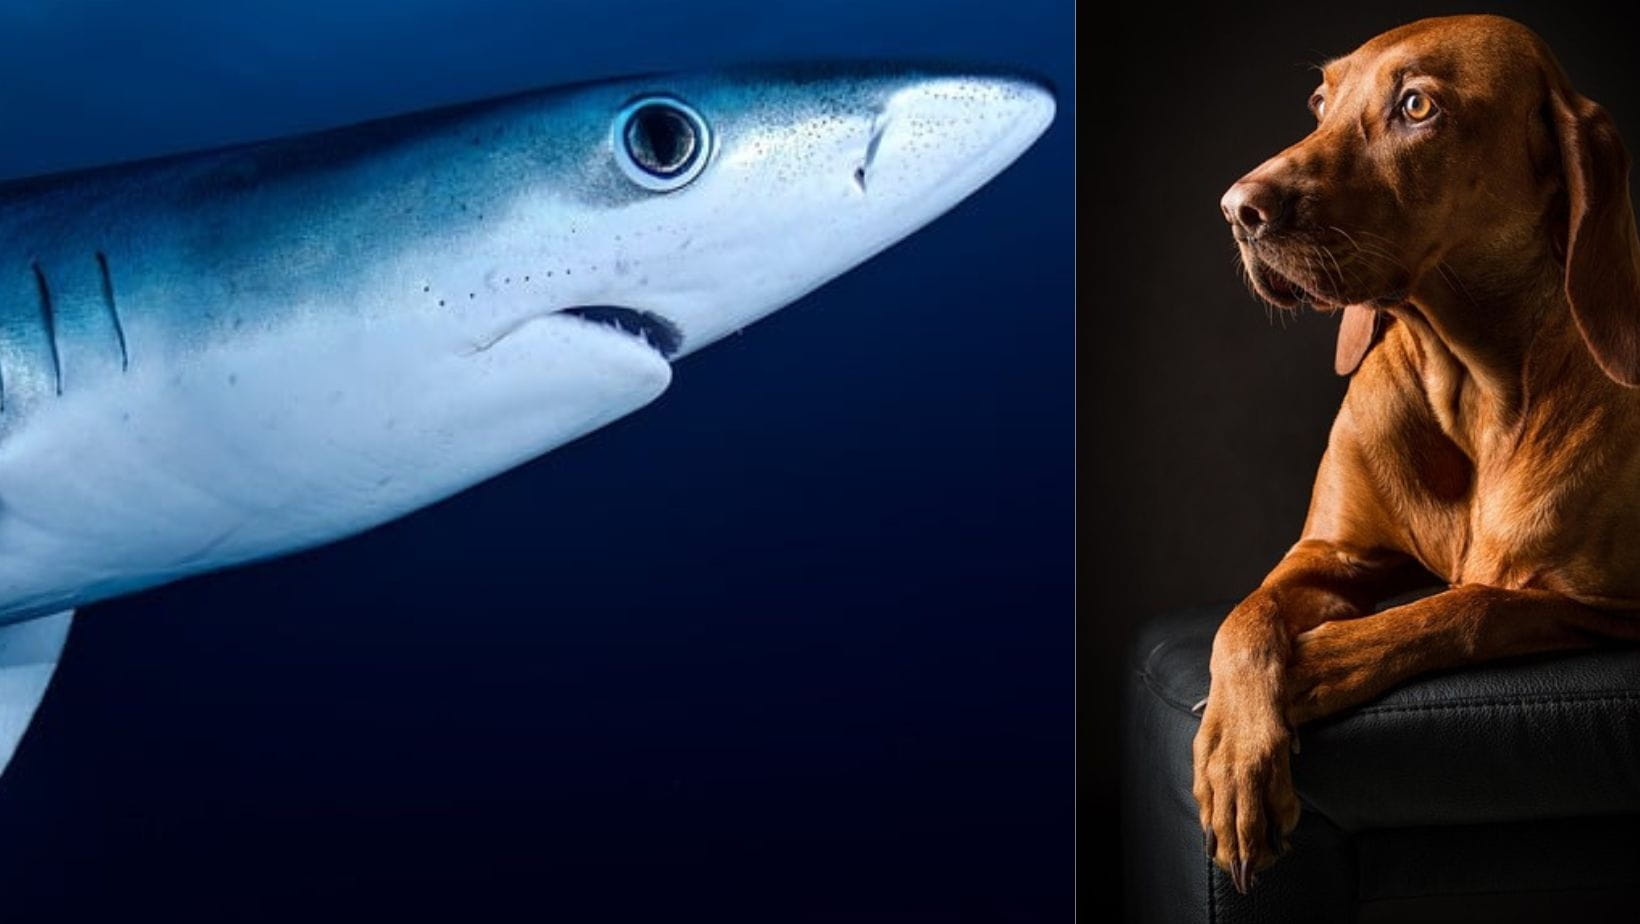 Picture is giving an idea of relation between dogs and Marine life